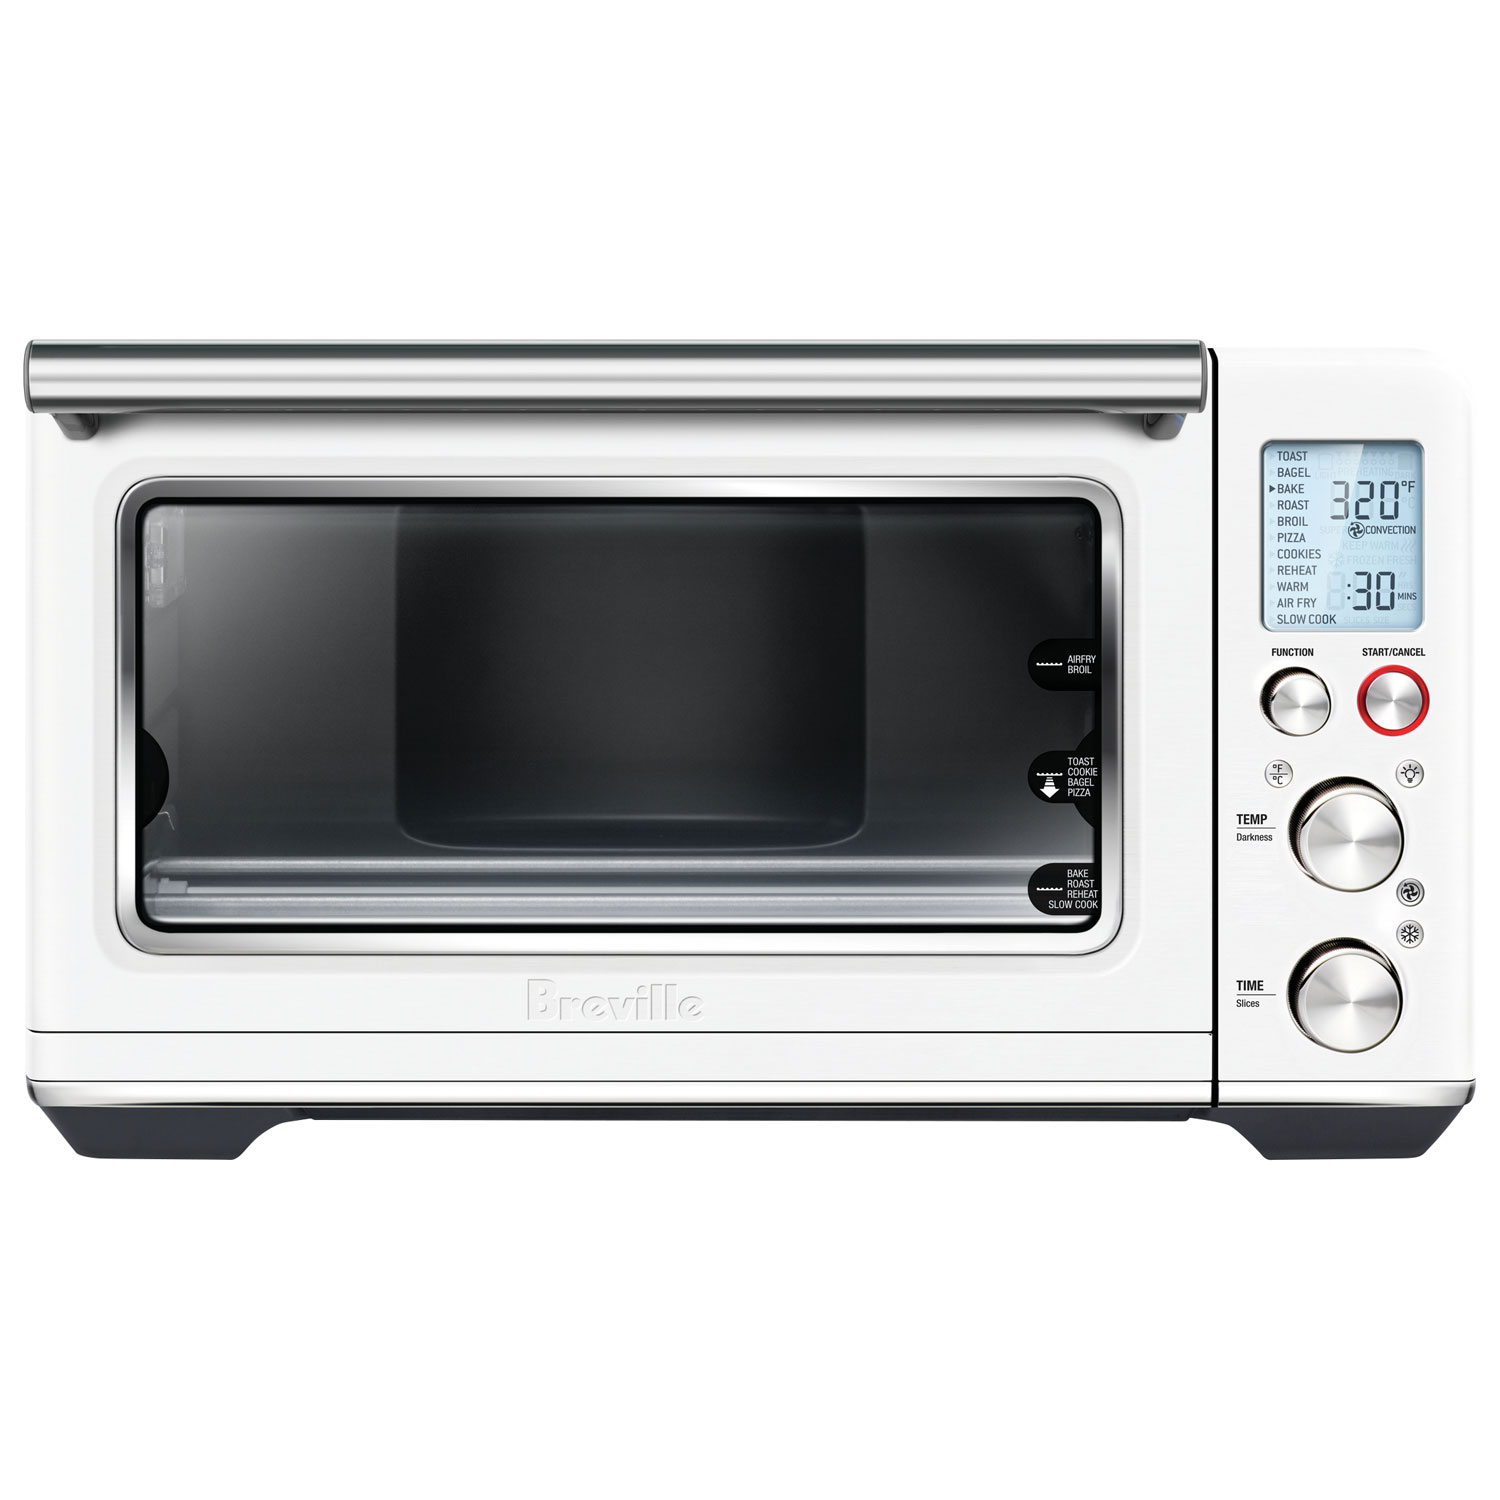 Breville Smart Oven Air Fry Convection Toaster Oven - 0.8 Cu. Ft./22.7L - Sea Salt